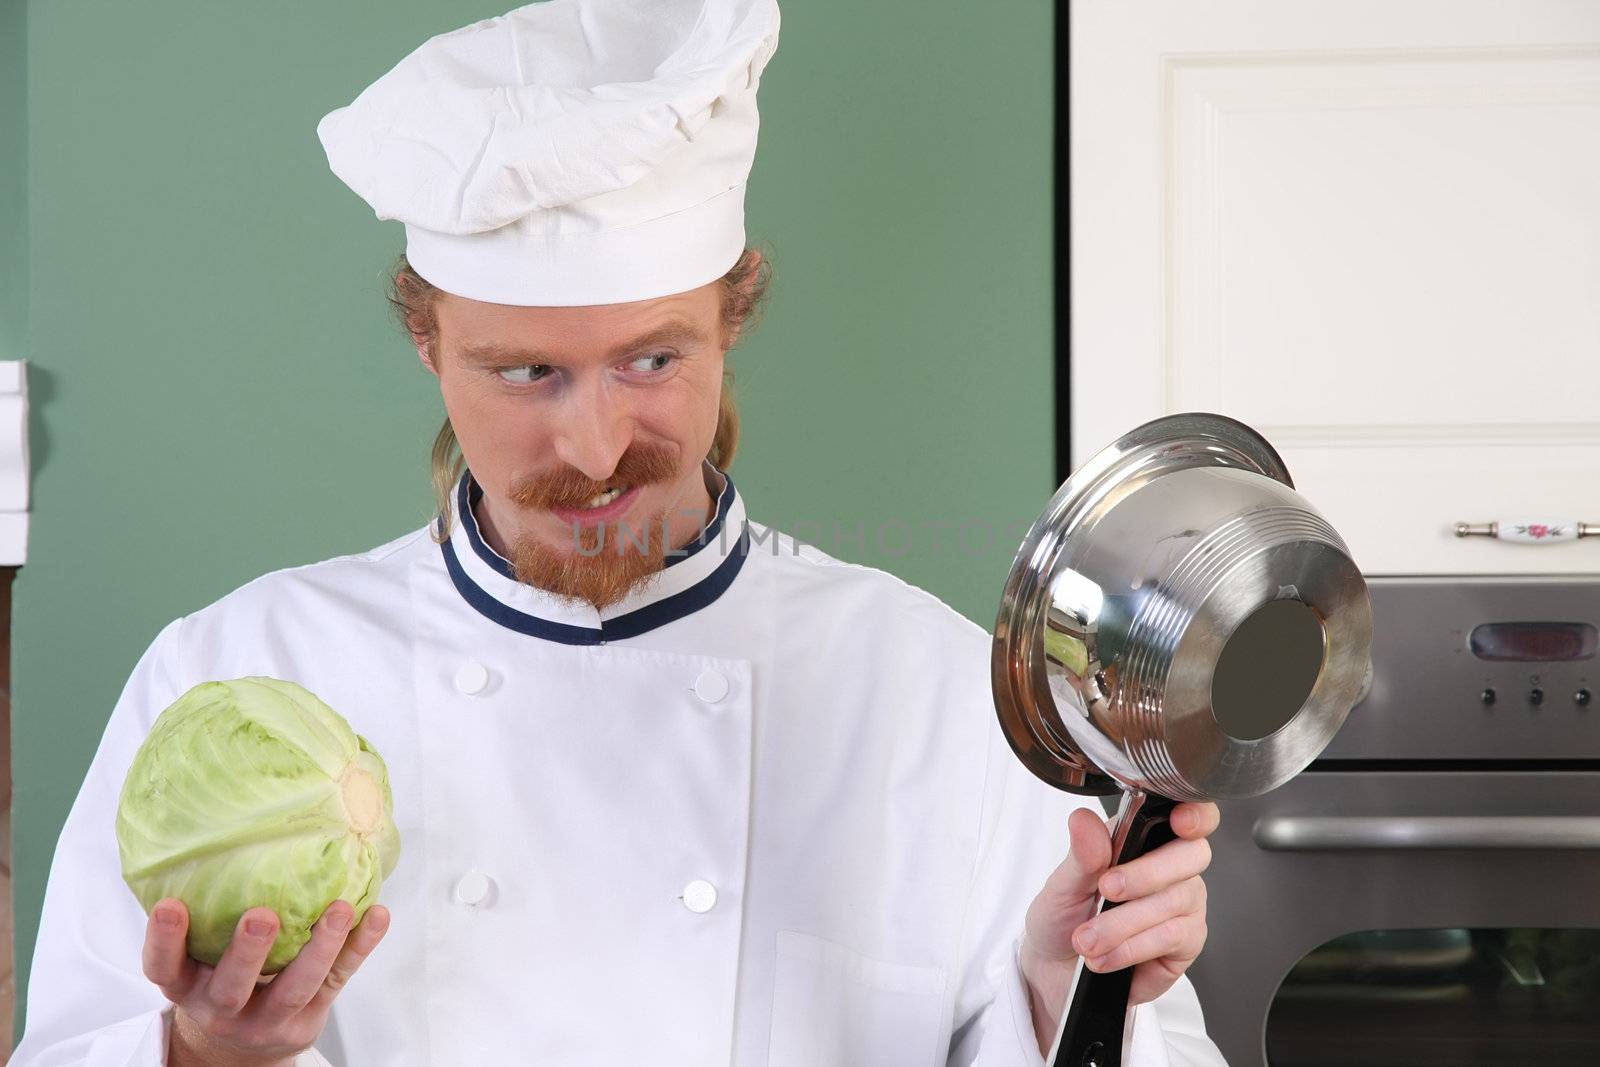 Young chef with cabbage, preparing lunch in kitchen